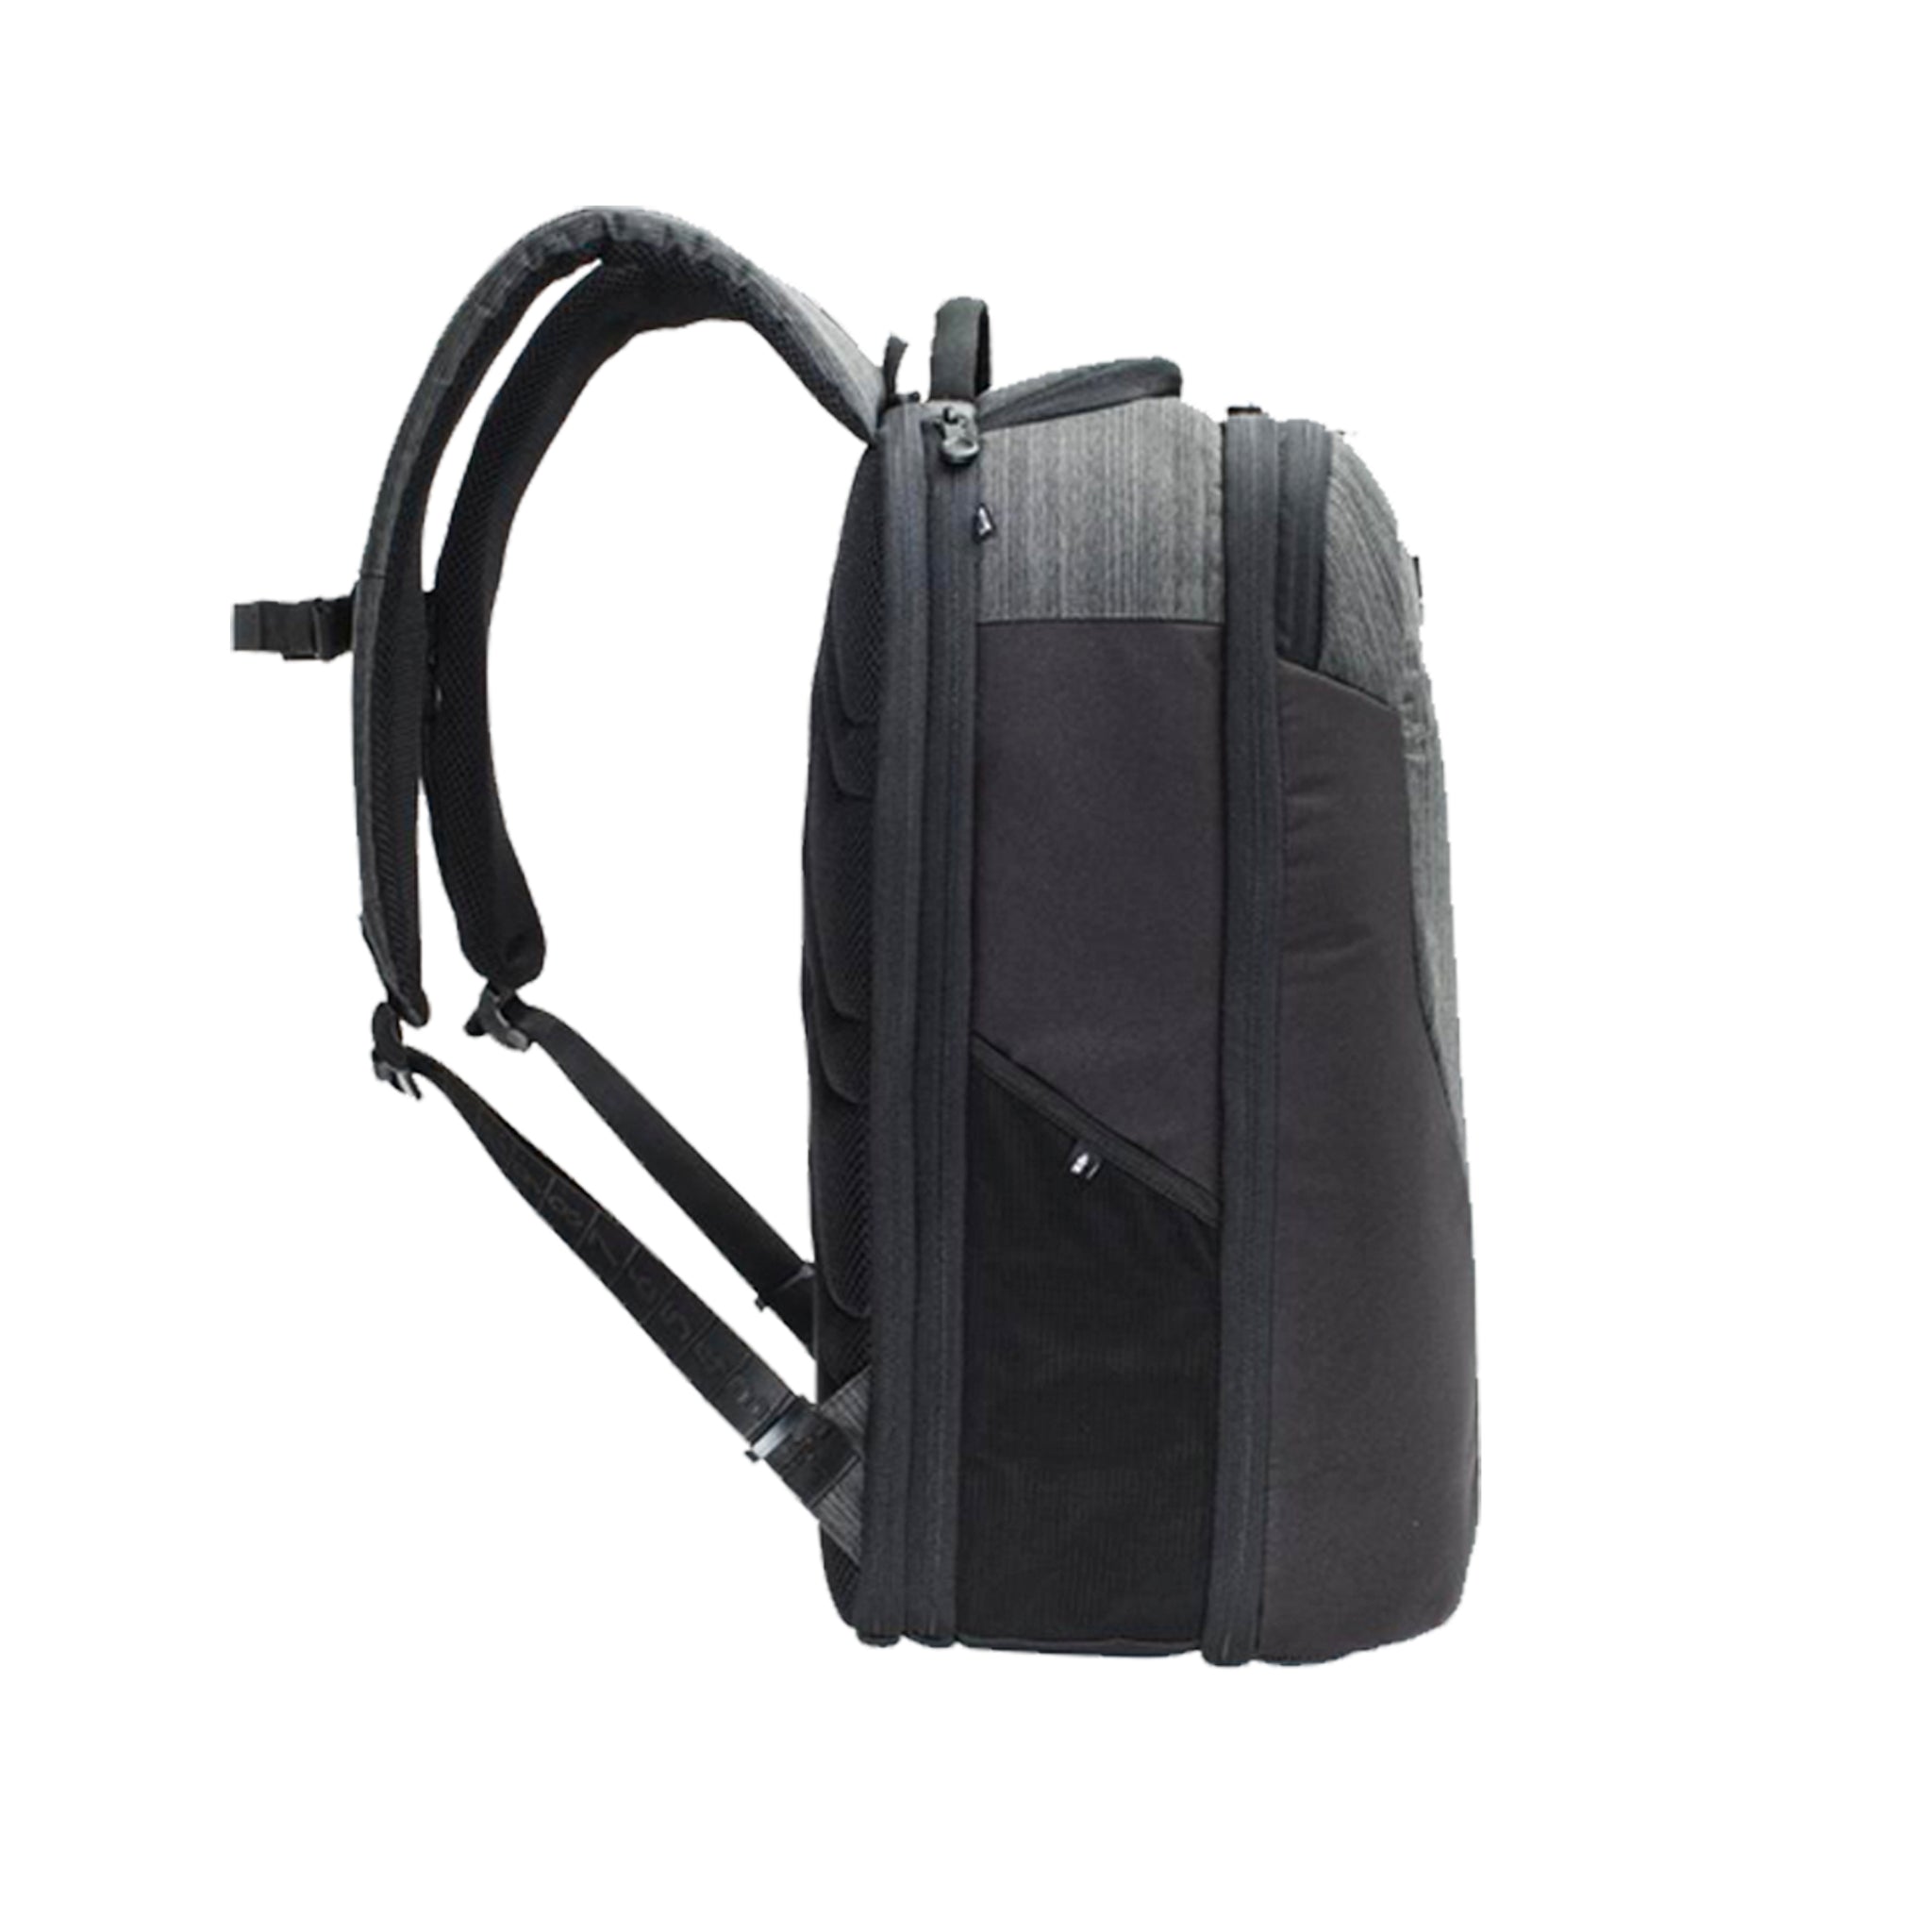 COMMUTE - The Biarritz Business Backpack for Men